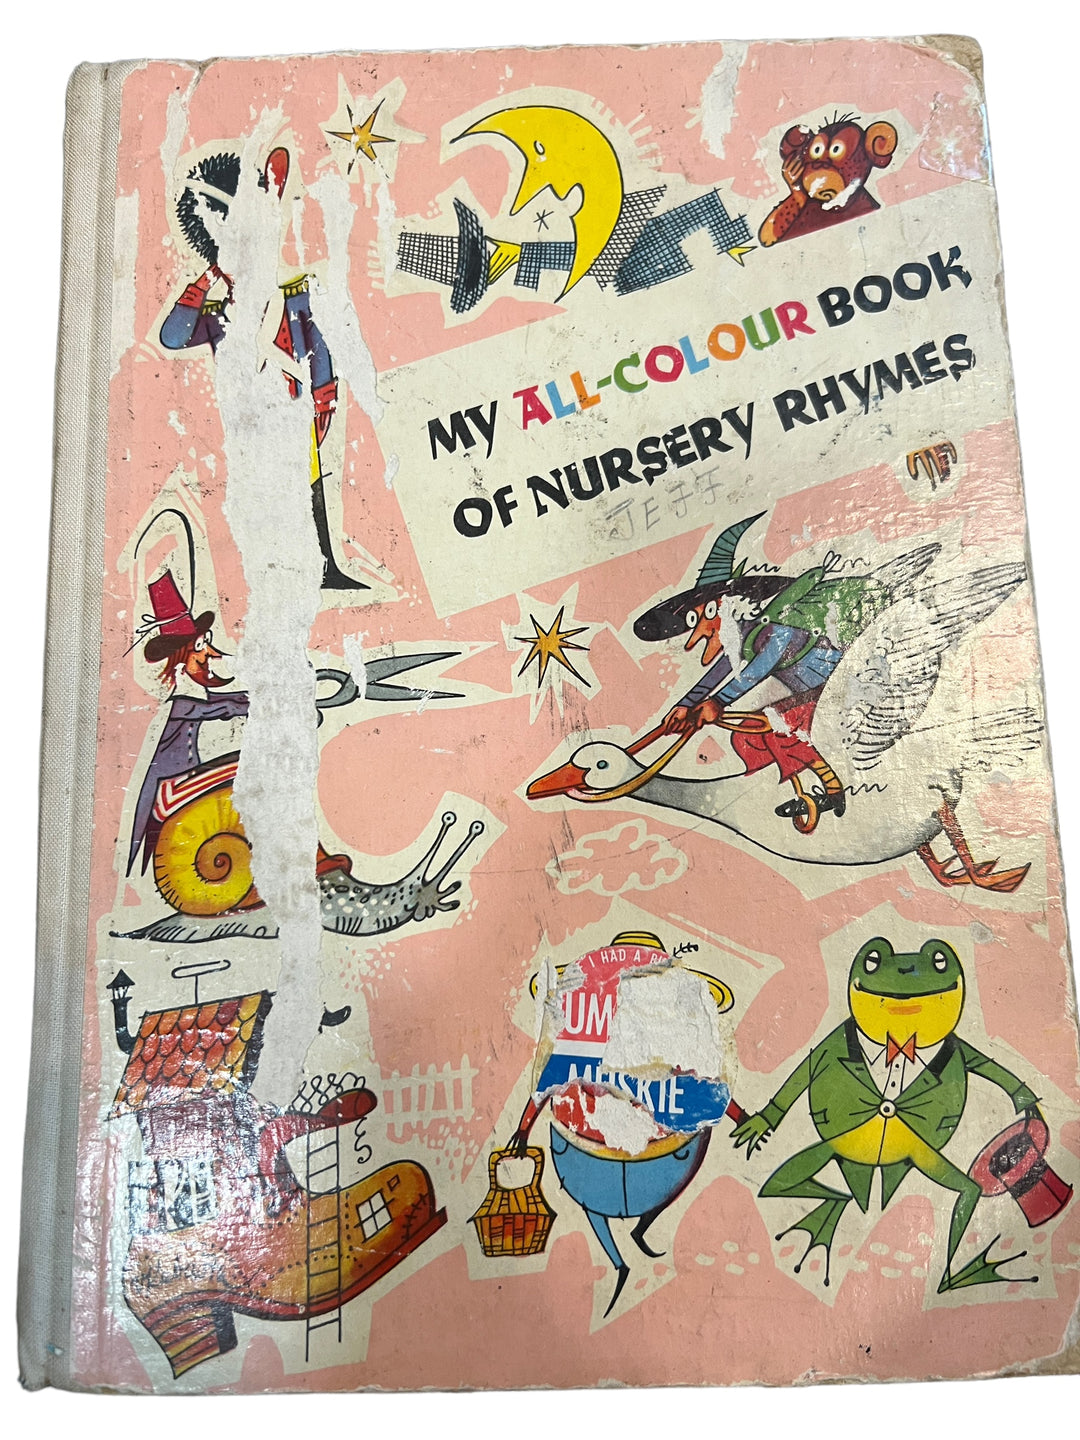 My All-Colour Book of Nursery Rhymes